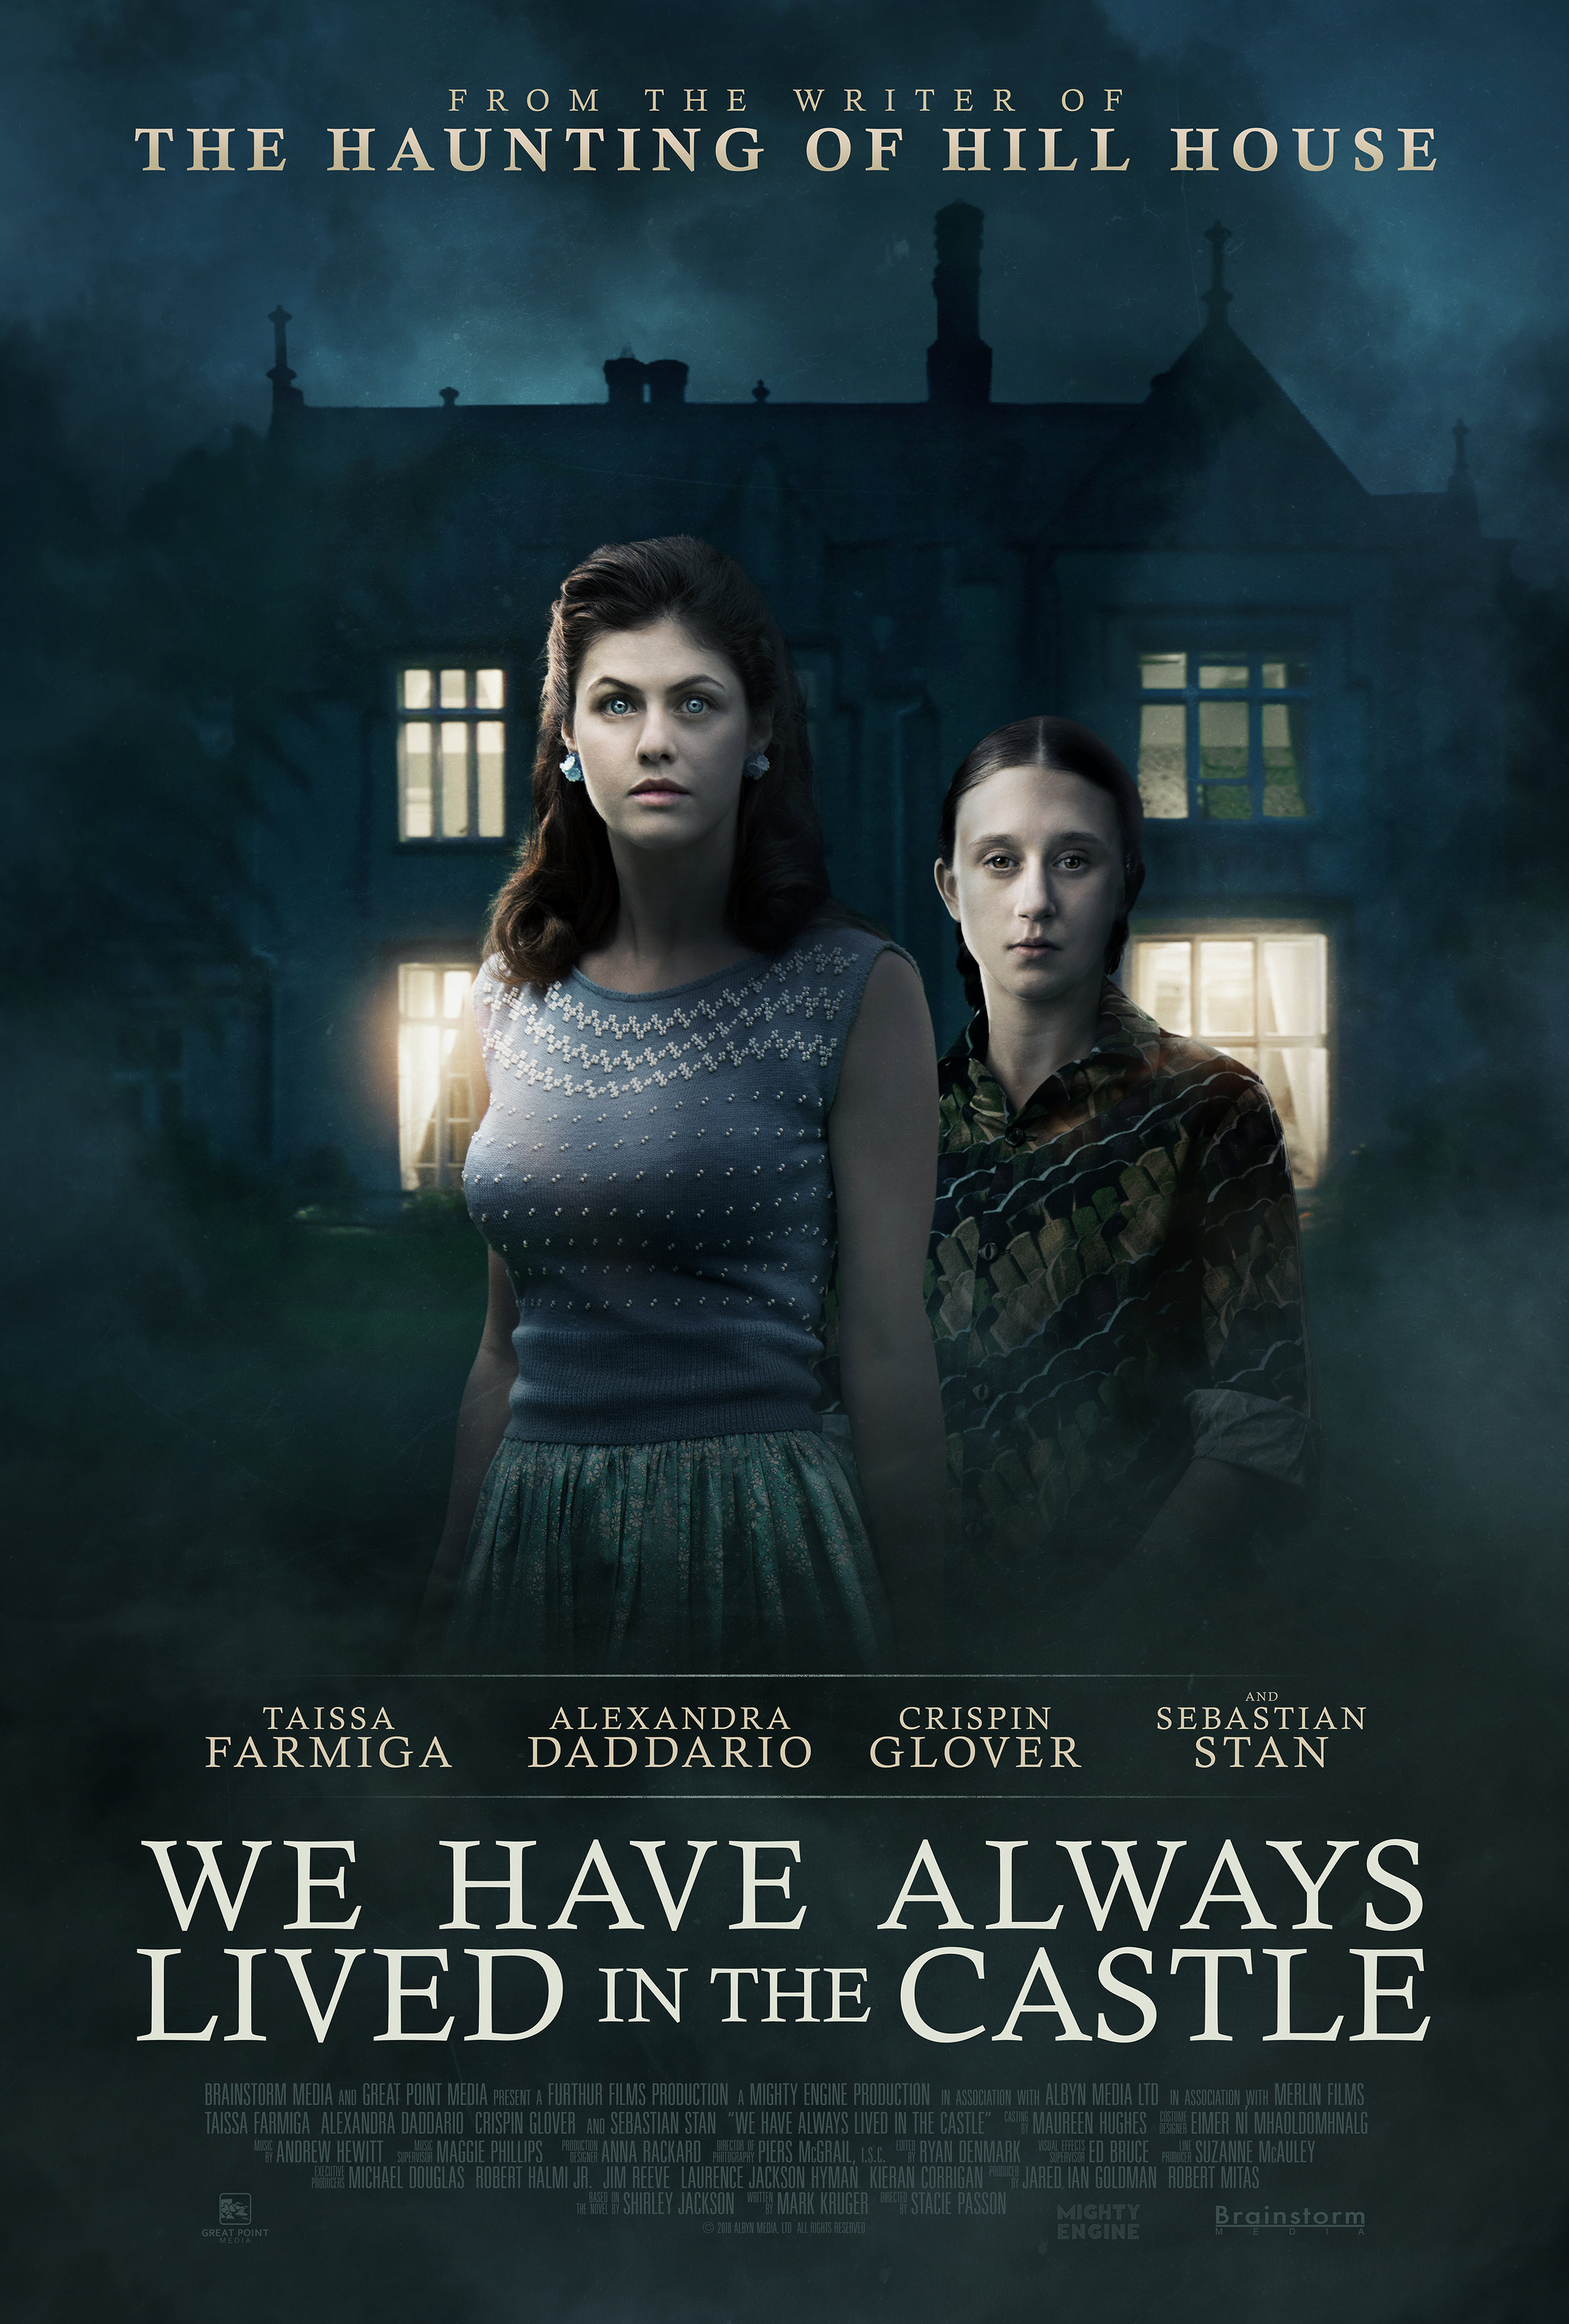 we have always lived in the castle poster.jpg